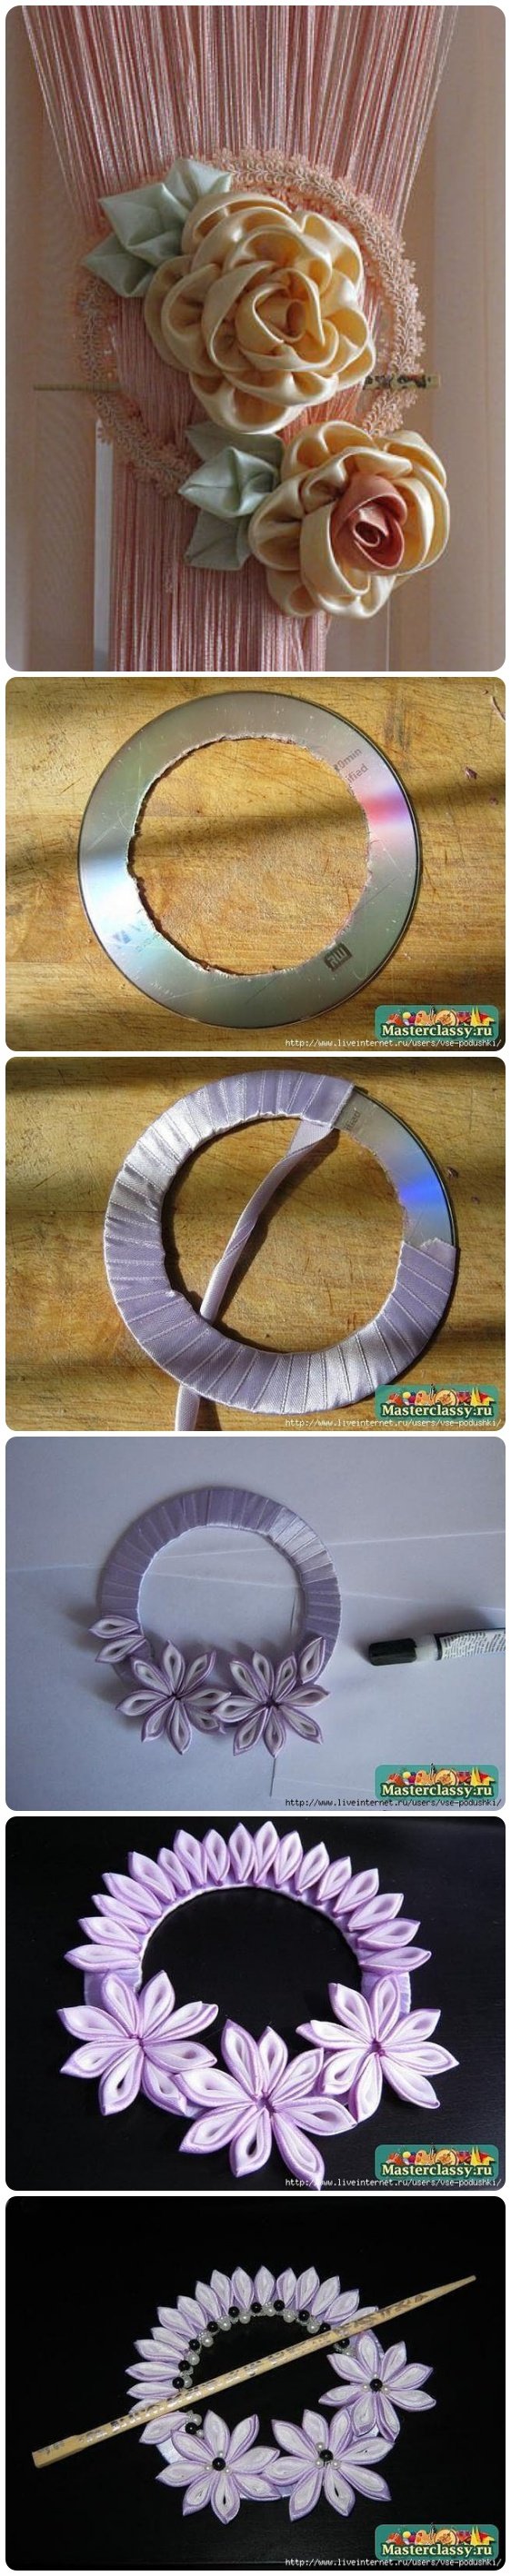 DIY curtain knot with Old CD